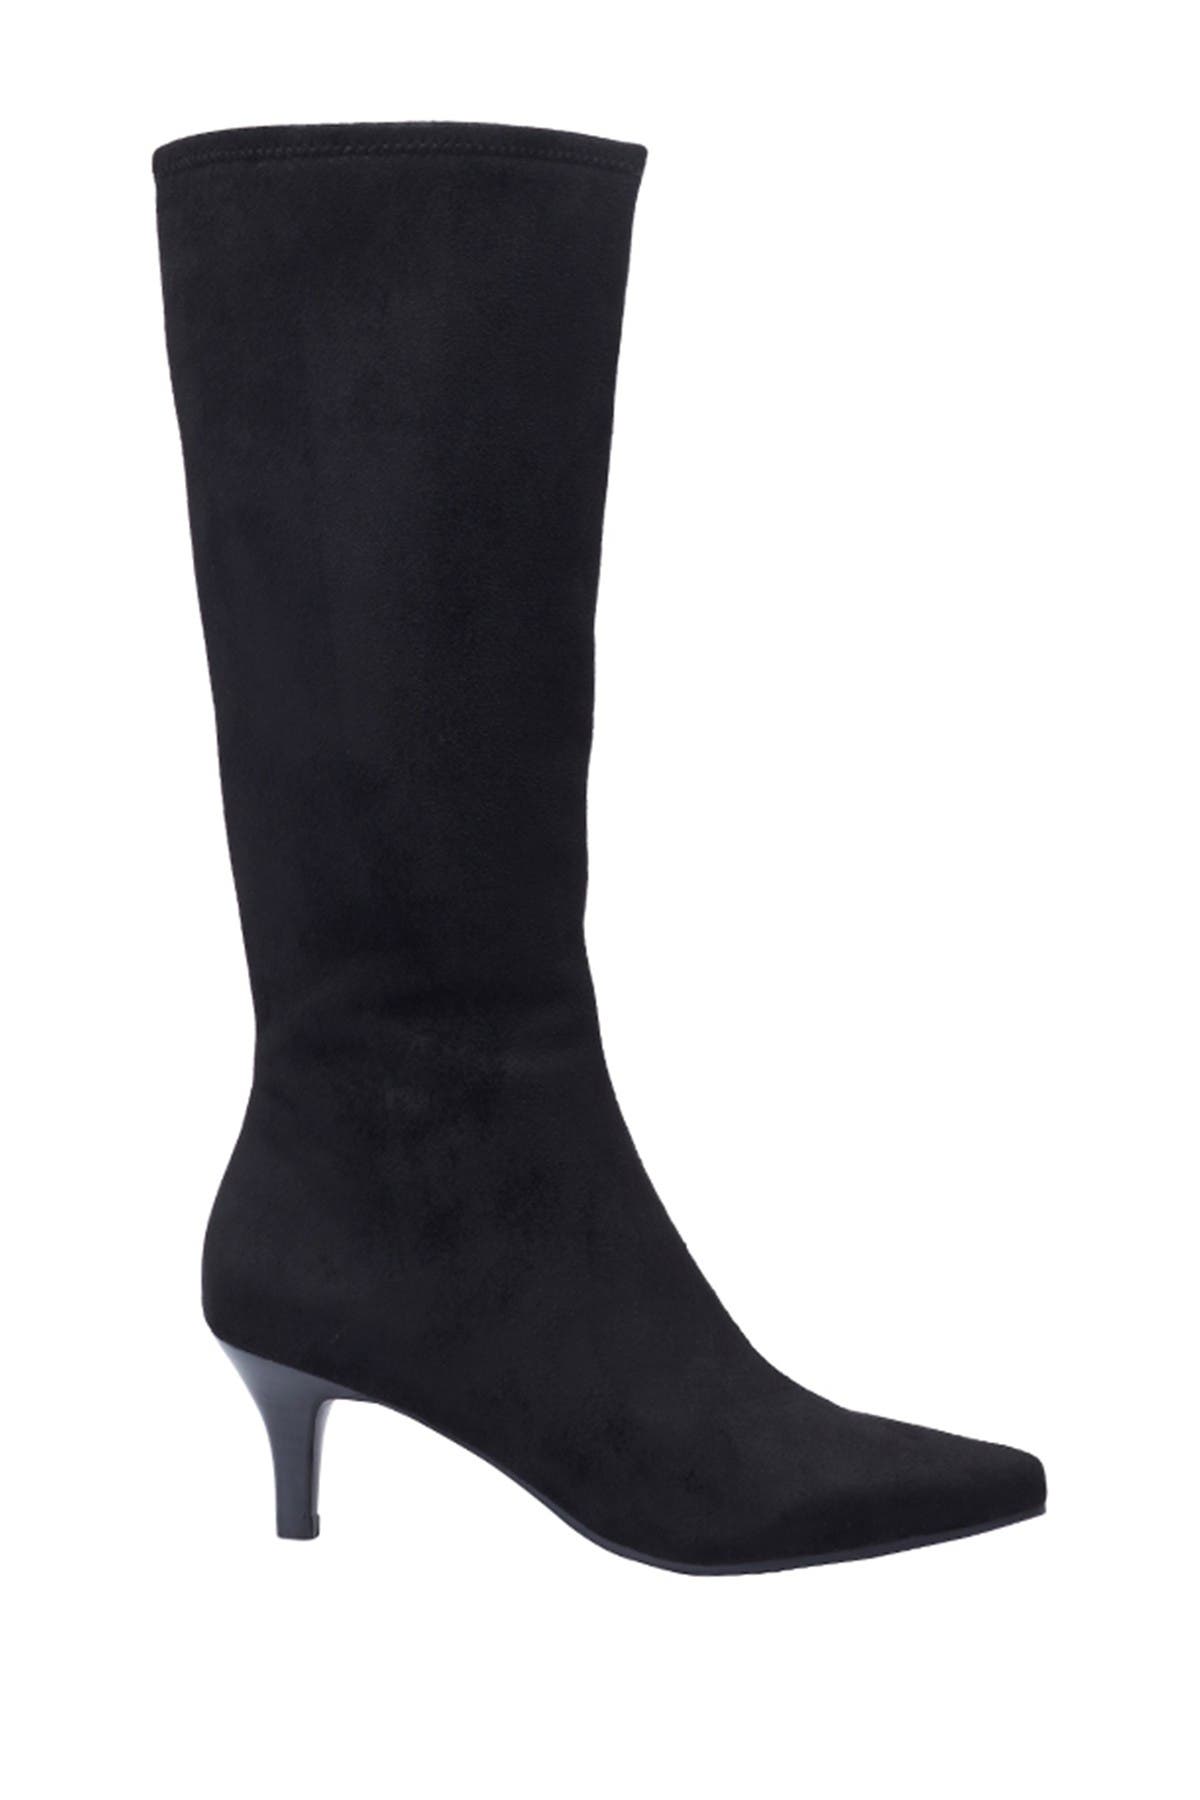 Impo Noland Stretch Tall Dress Boot In Oxford1